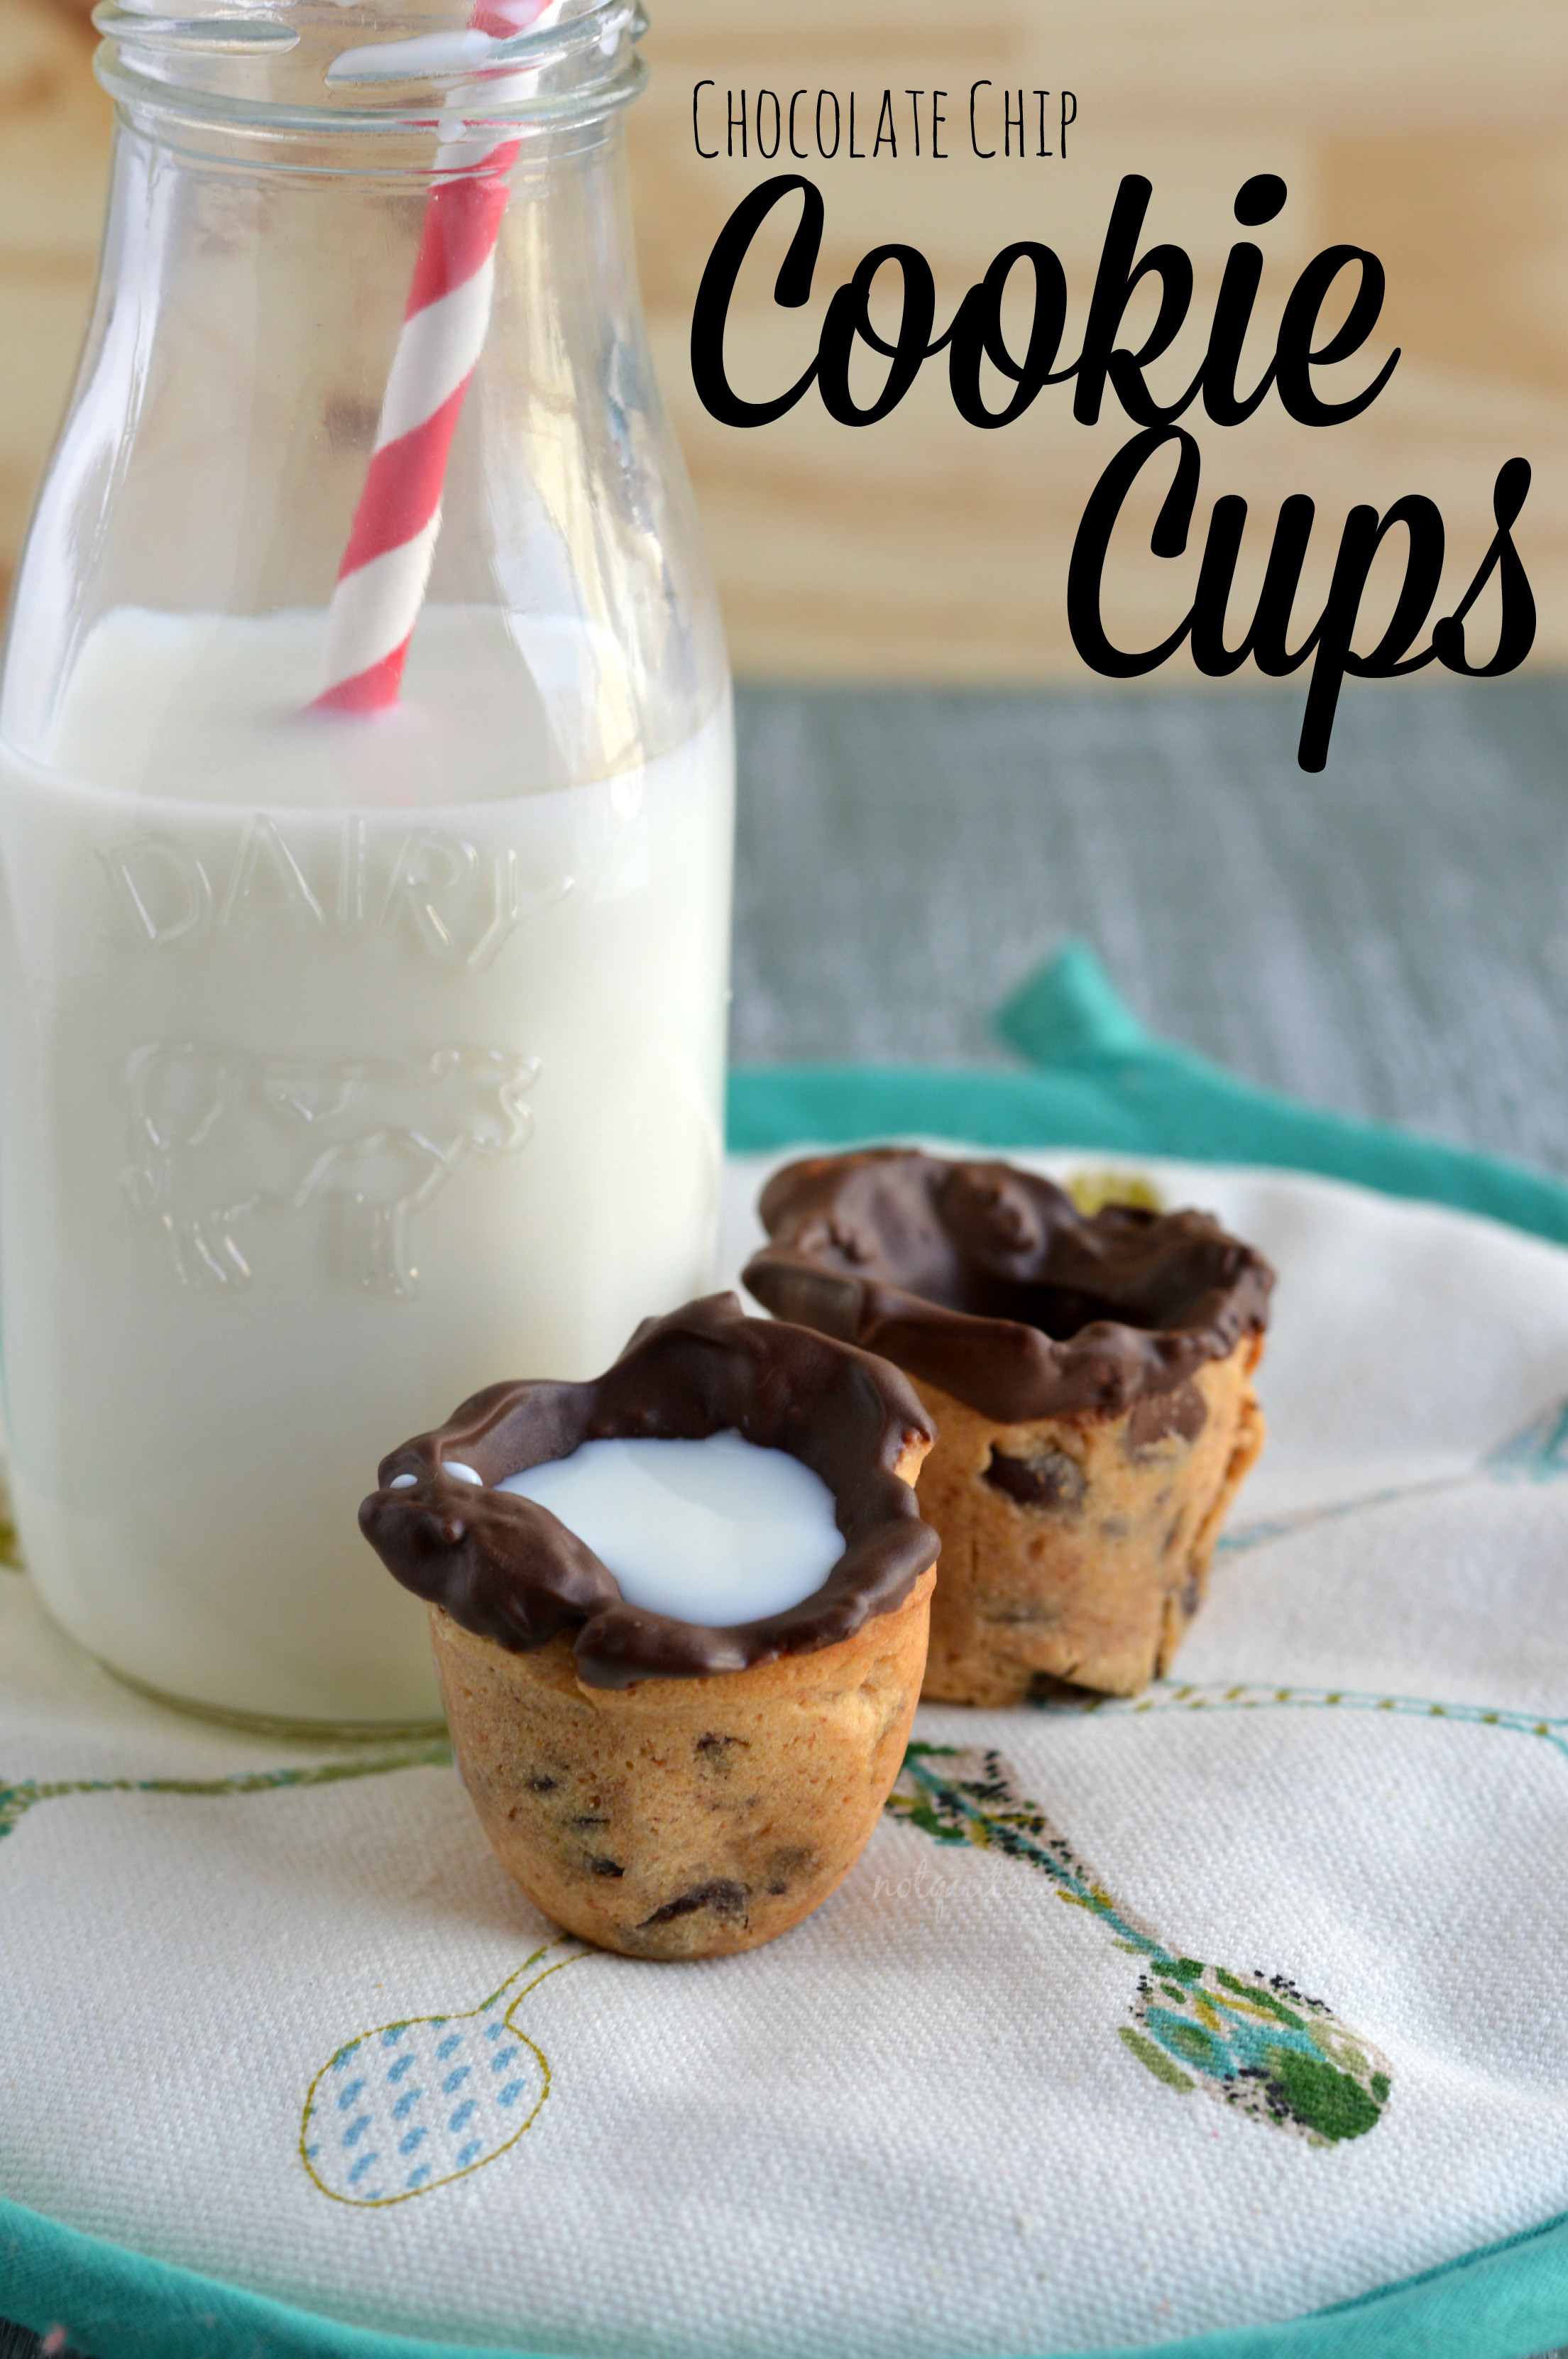 Chocolate Chip Cookie Cups Recipe